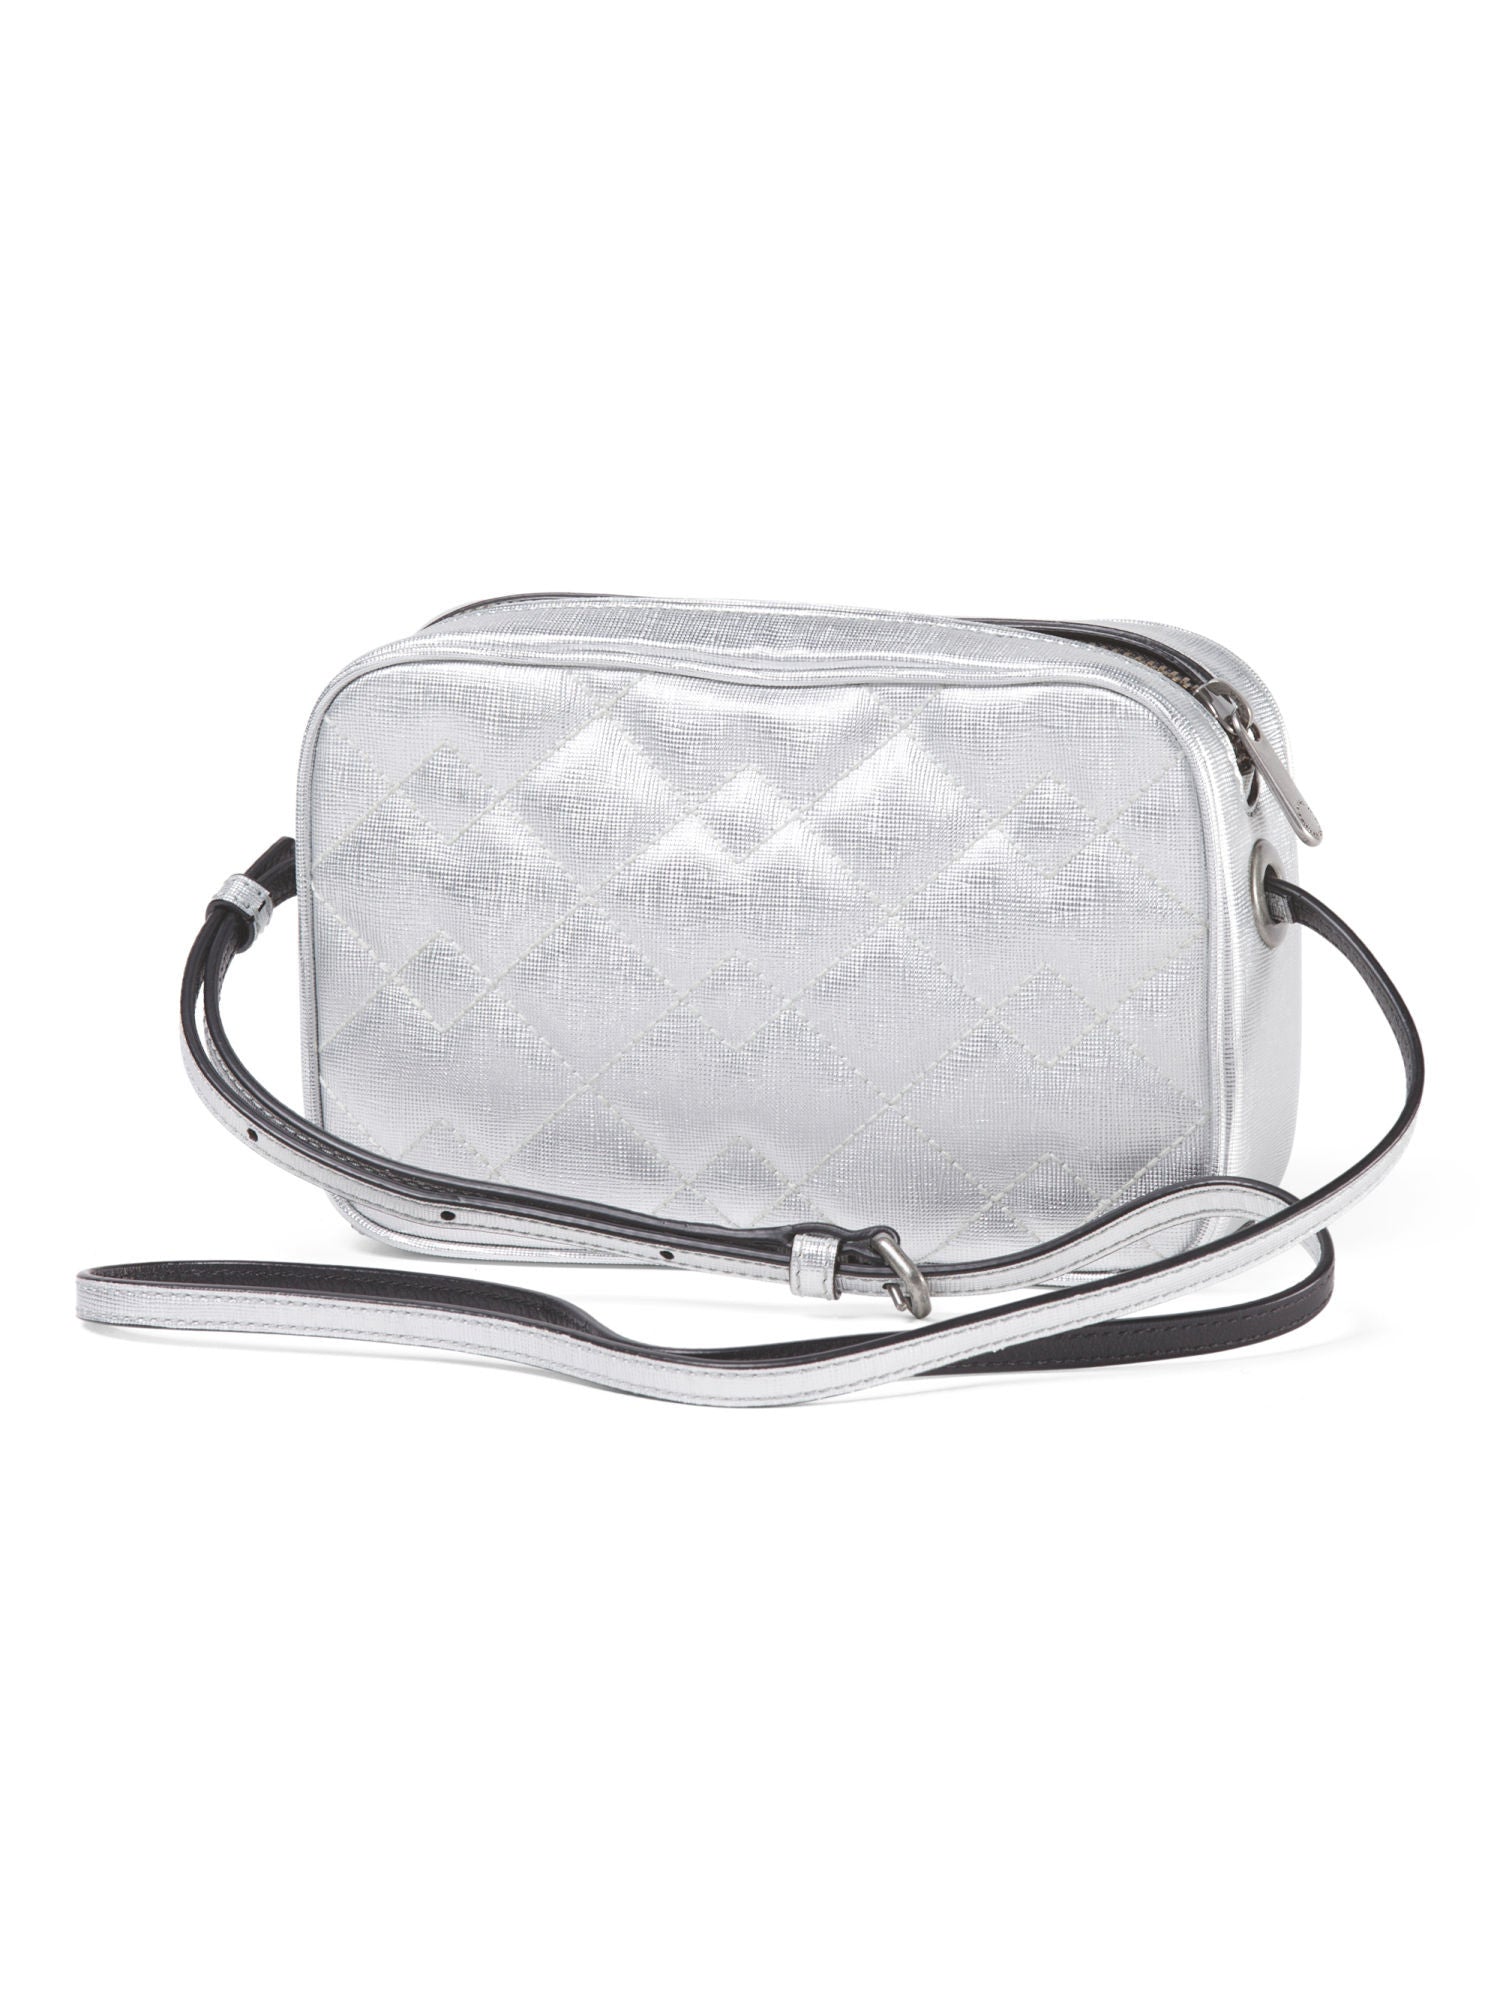 MARC BY MARC JACOBS Leather Sally Metallic Crossbody – Pit-a-Pats.com